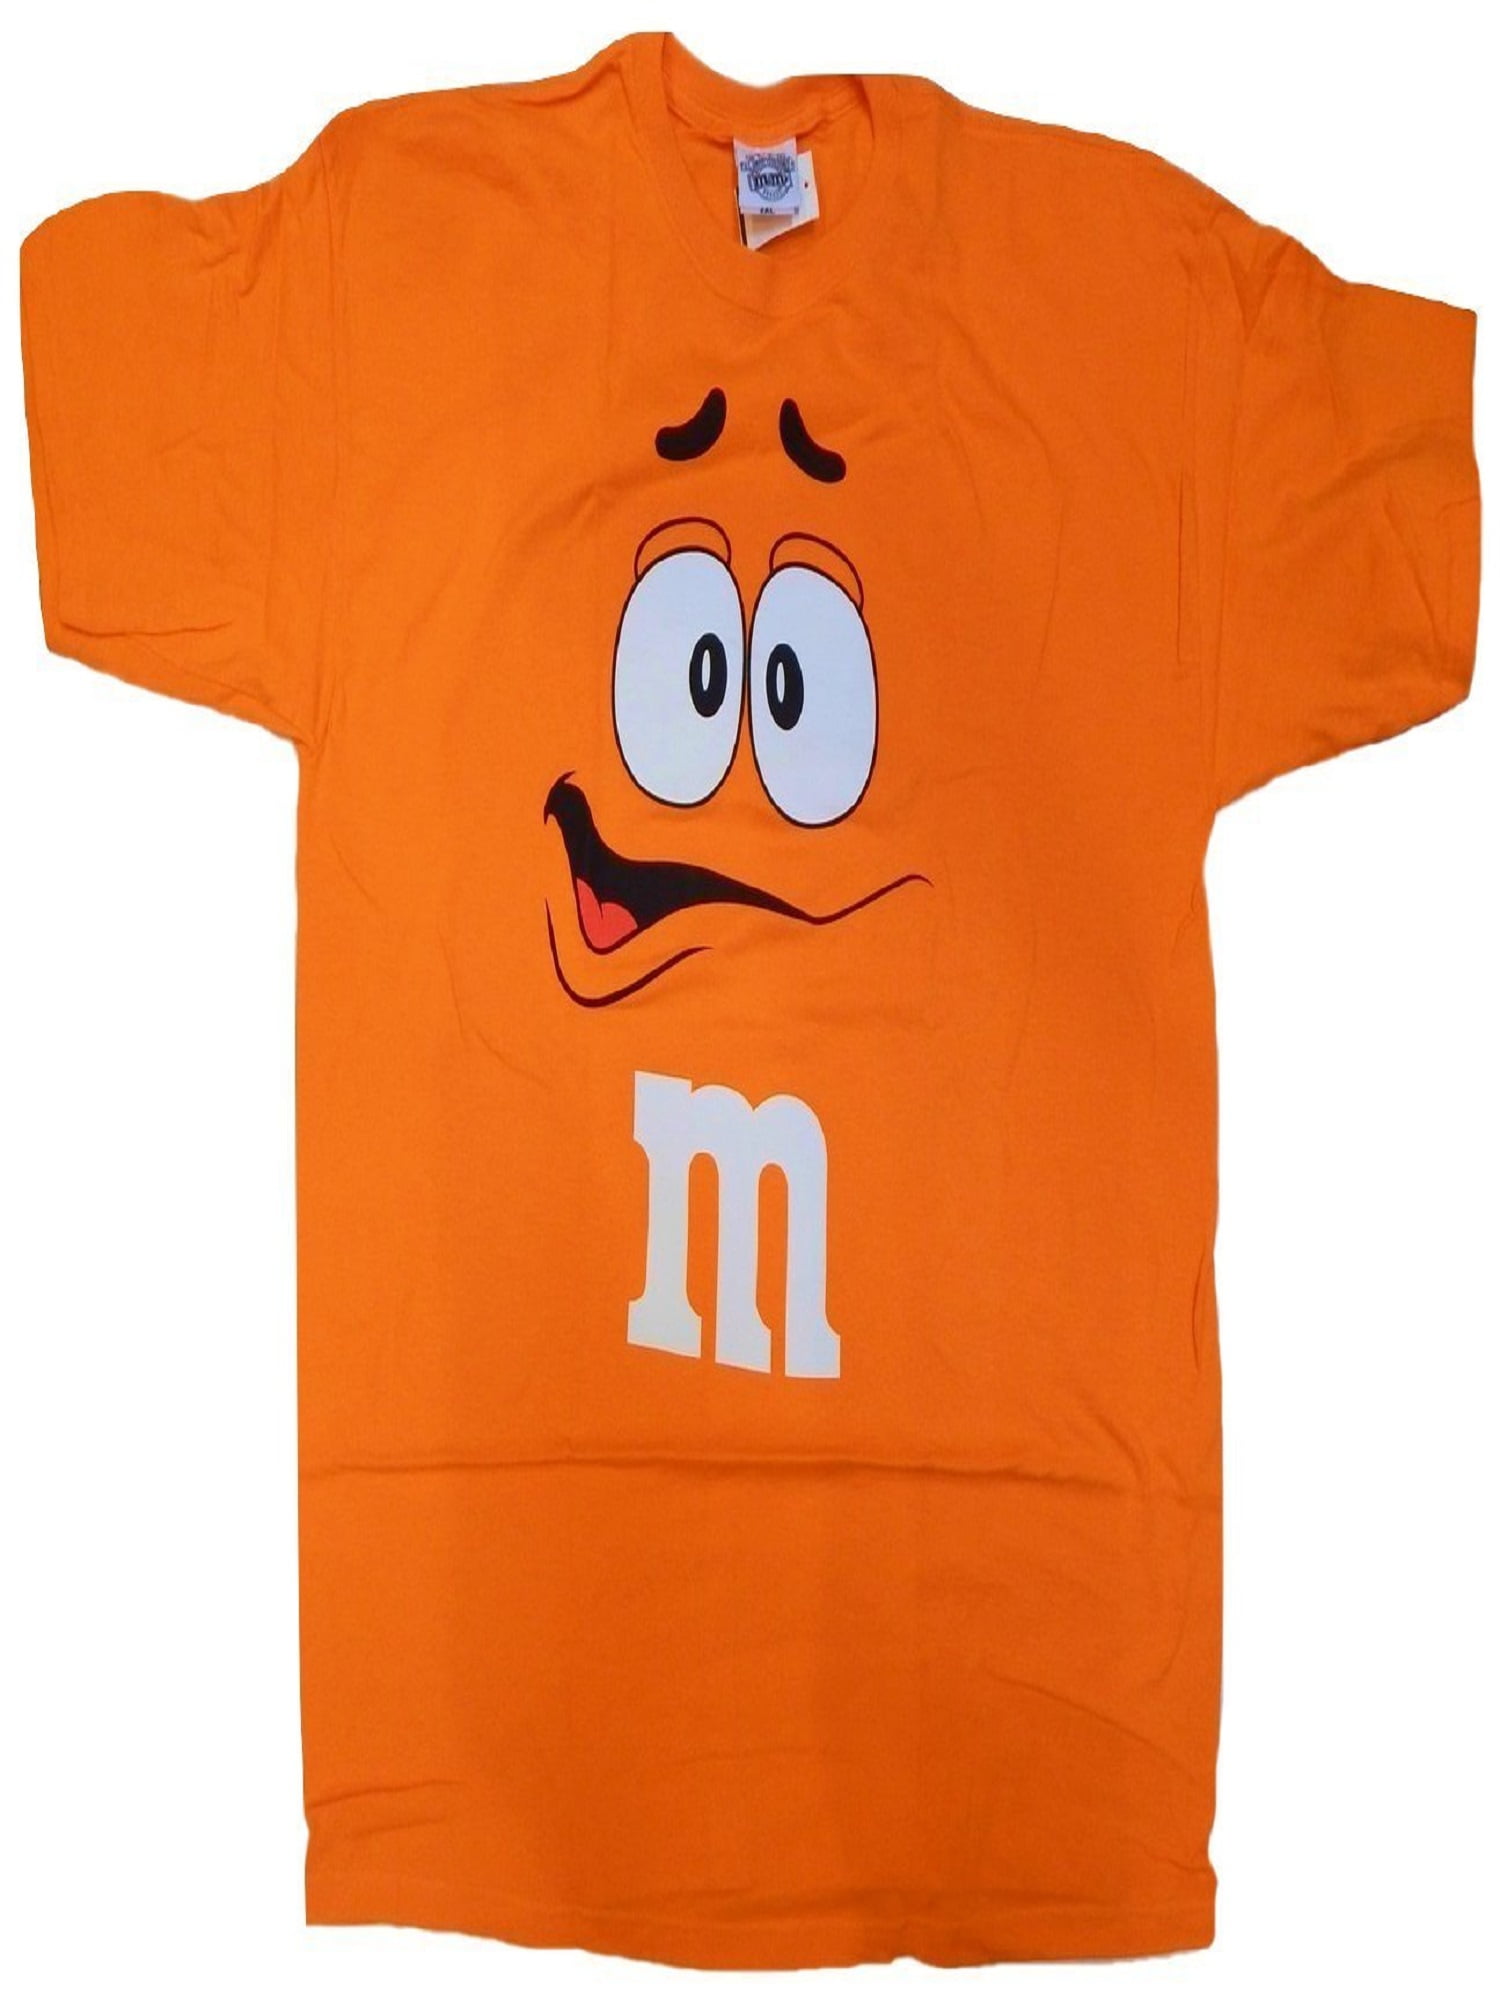 90s Red M&M Chocolate Candy Mascot Mars Funny T-shirt Extra 